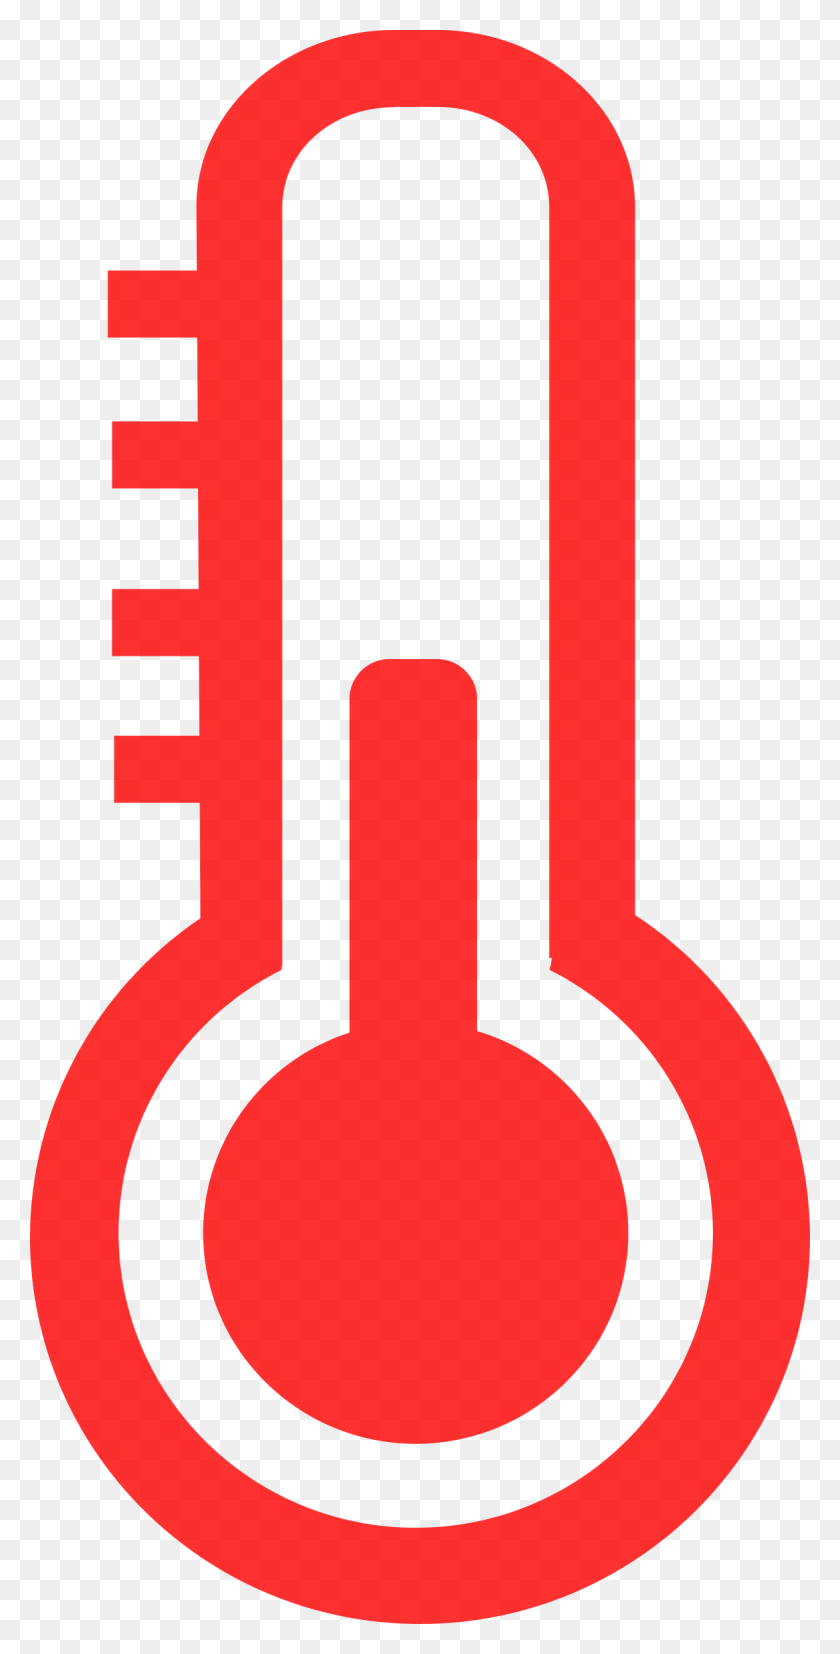 1174x2400 Hot And Cold Cartoon Thermometers Royalty Free Cliparts Vectors - Hot Thermometer Clipart